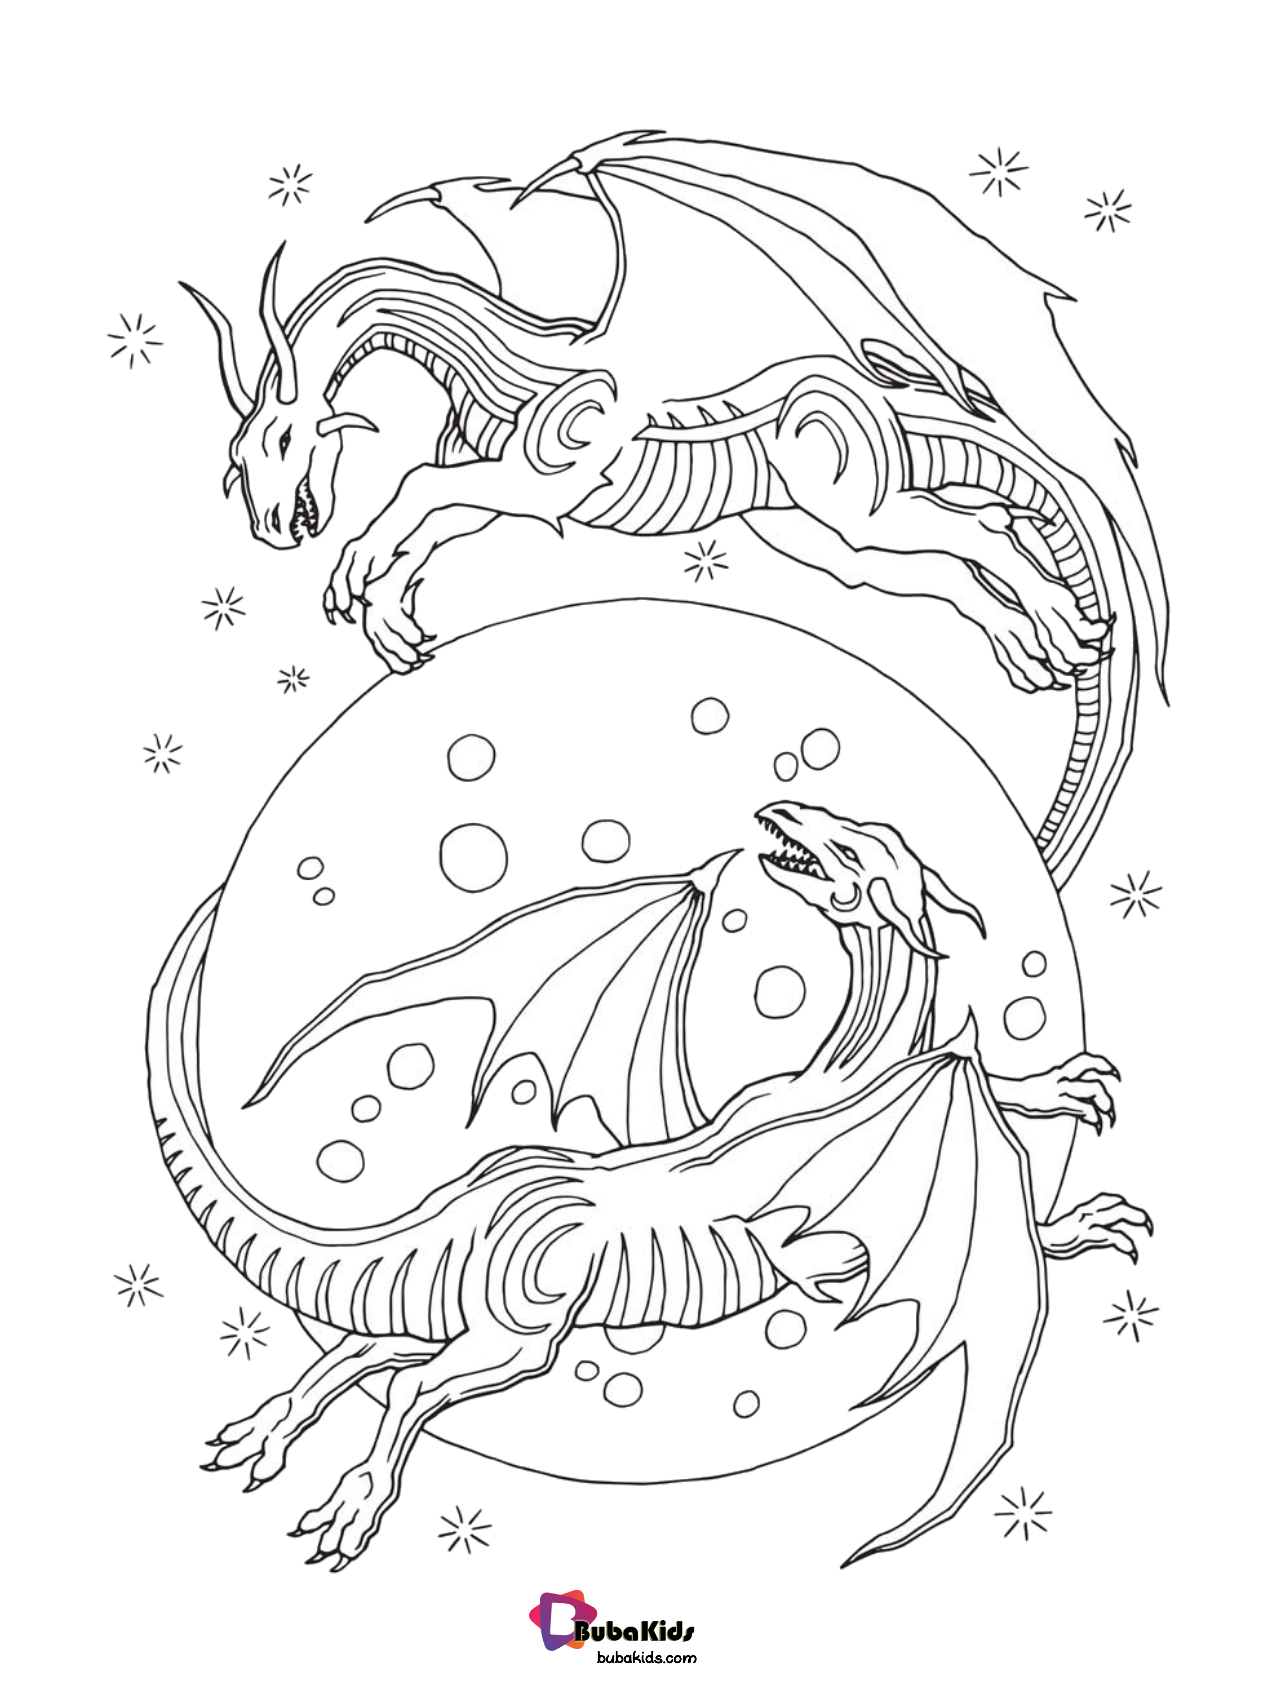 Dragon legendary monster coloring page.